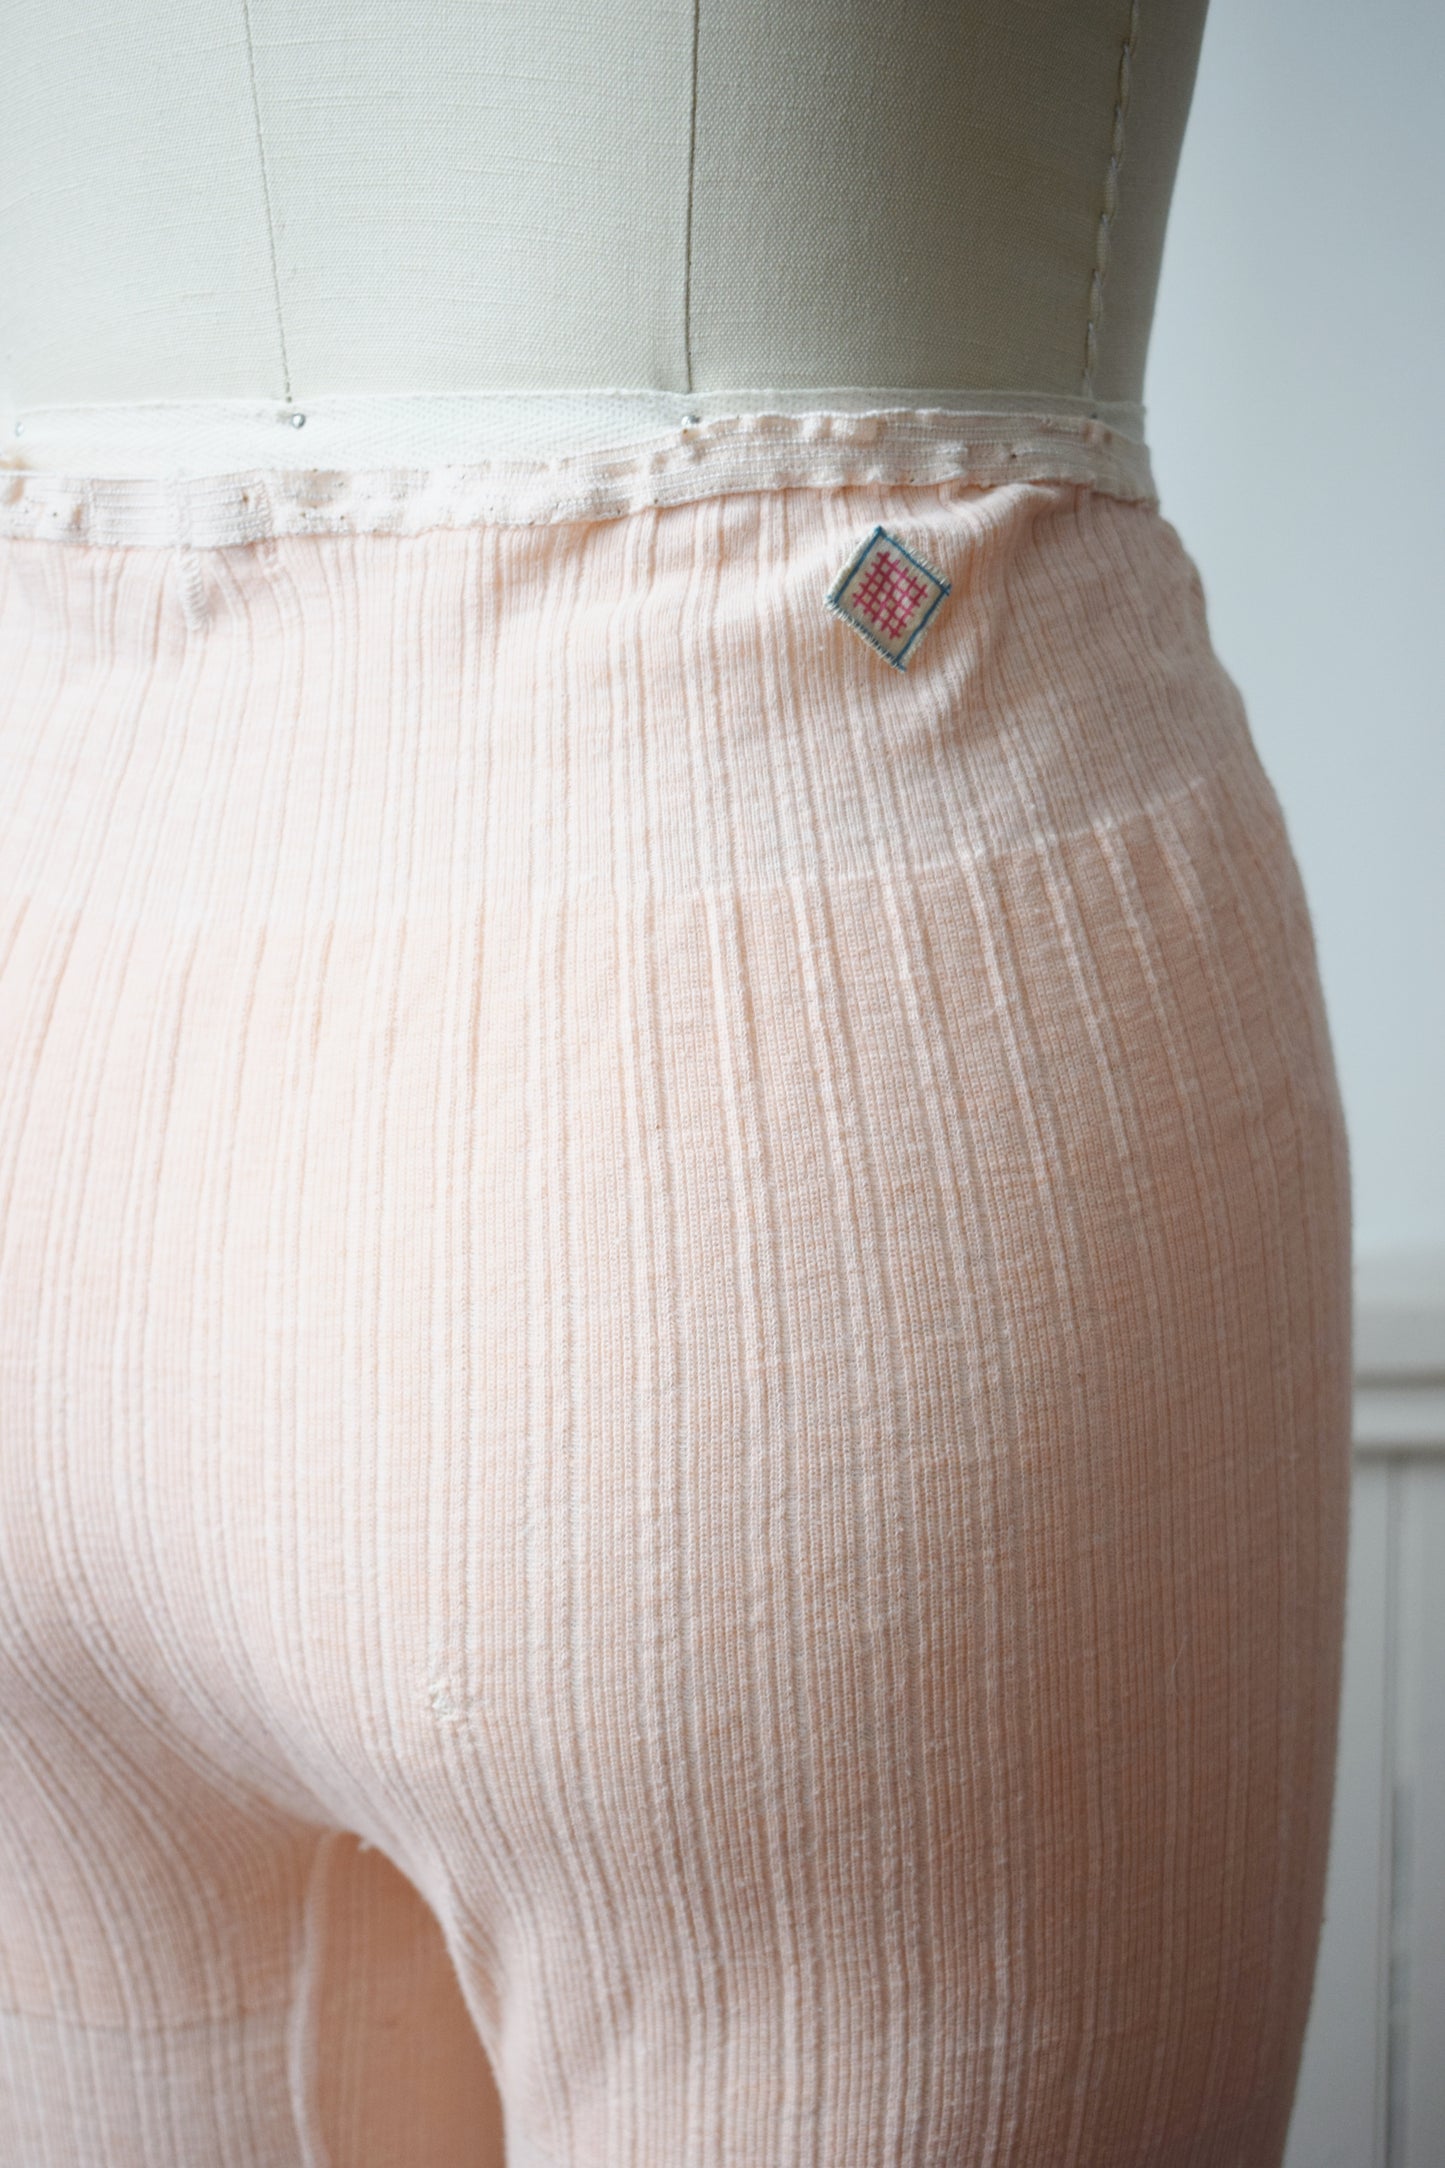 1940s Peachy Pink Knit Shorts by Pilgrim | 2 Patches | XS/S